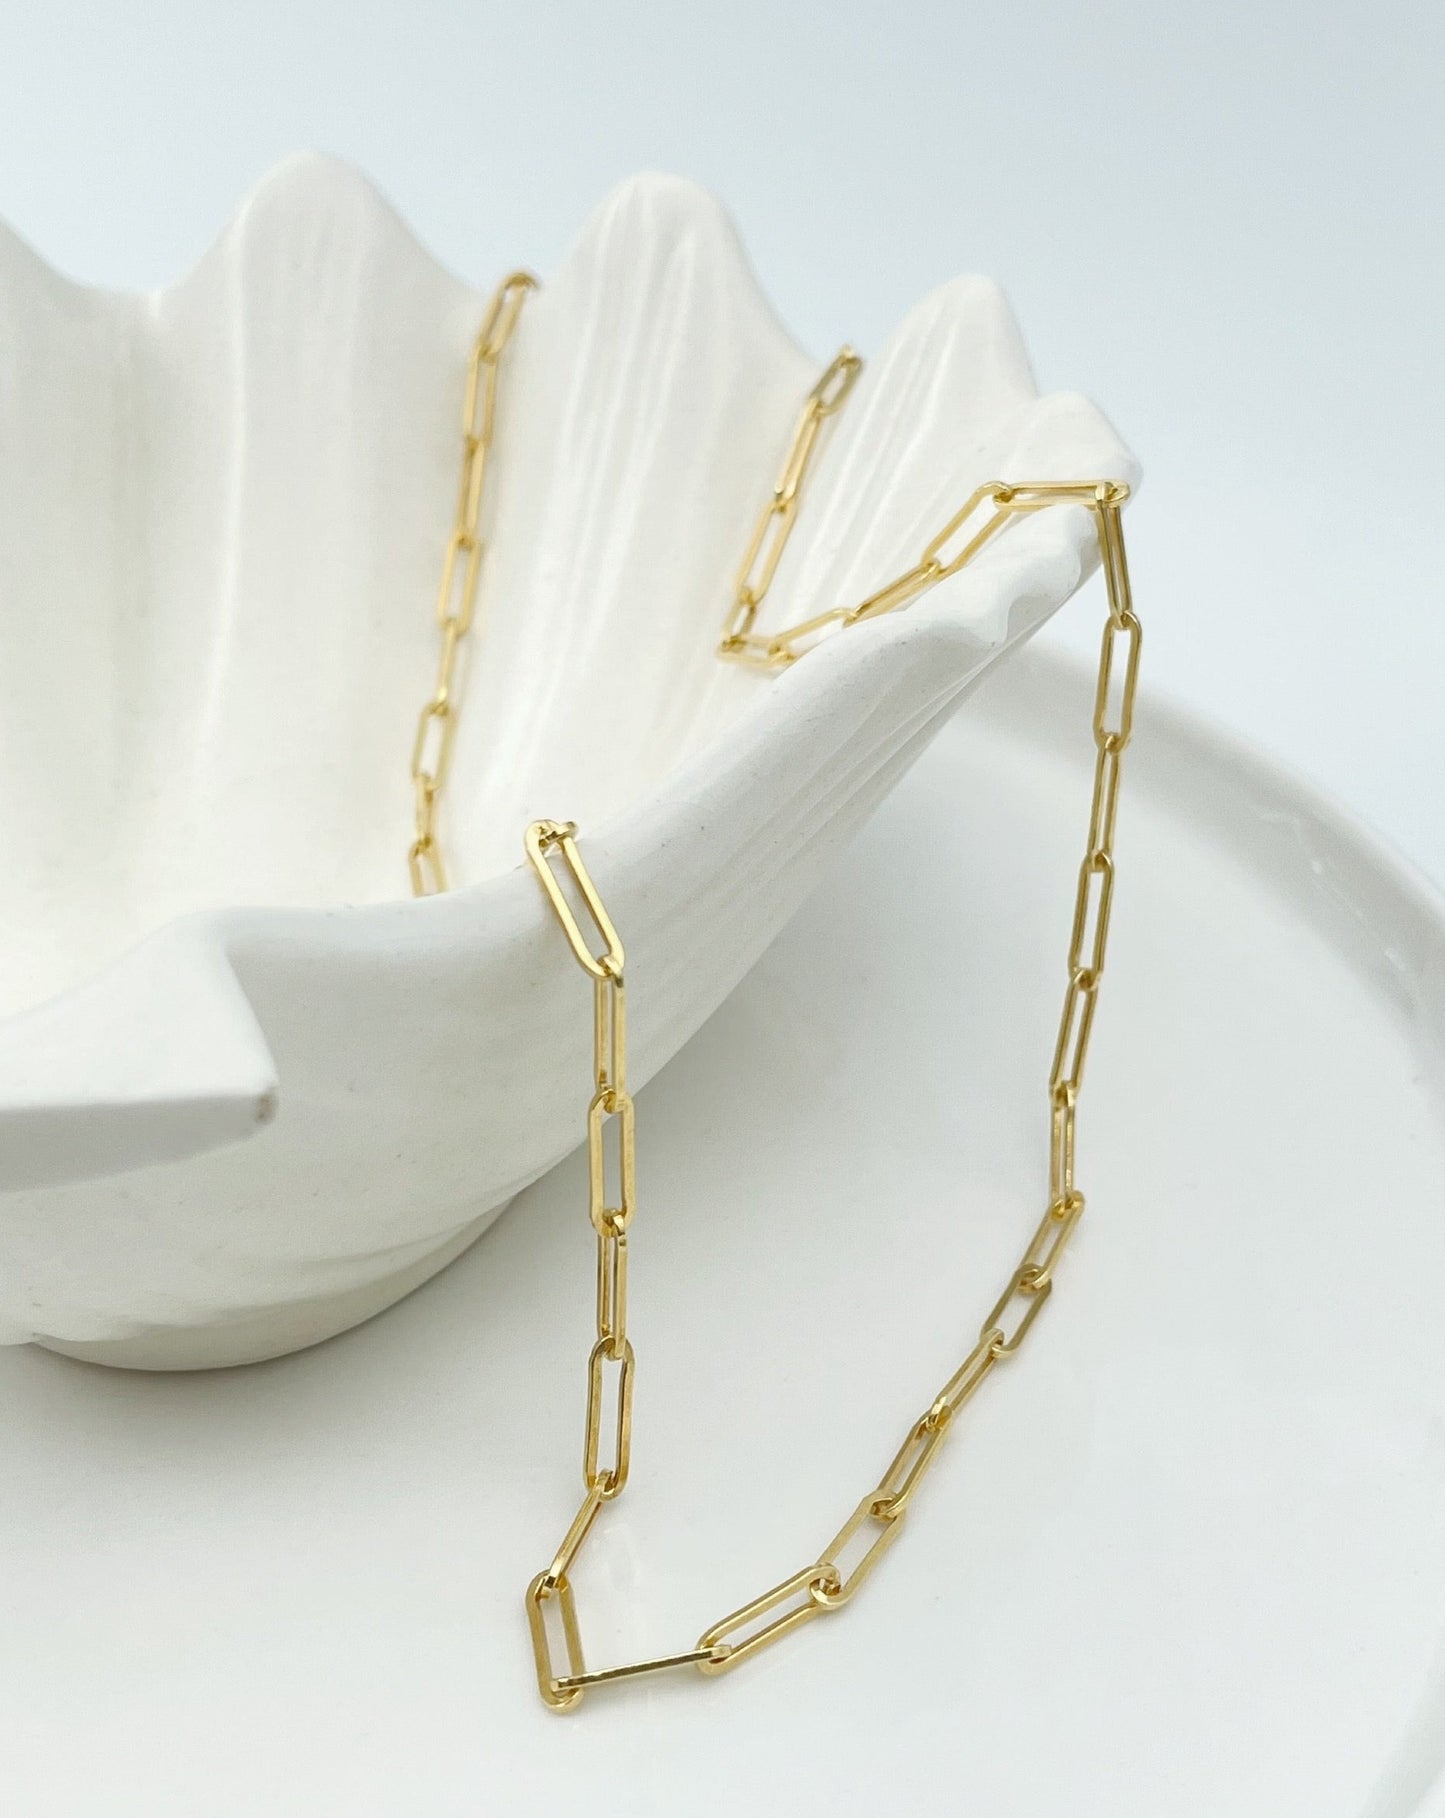 9kt Gold Paperclip Chain from Collective & Co online jewellery store.